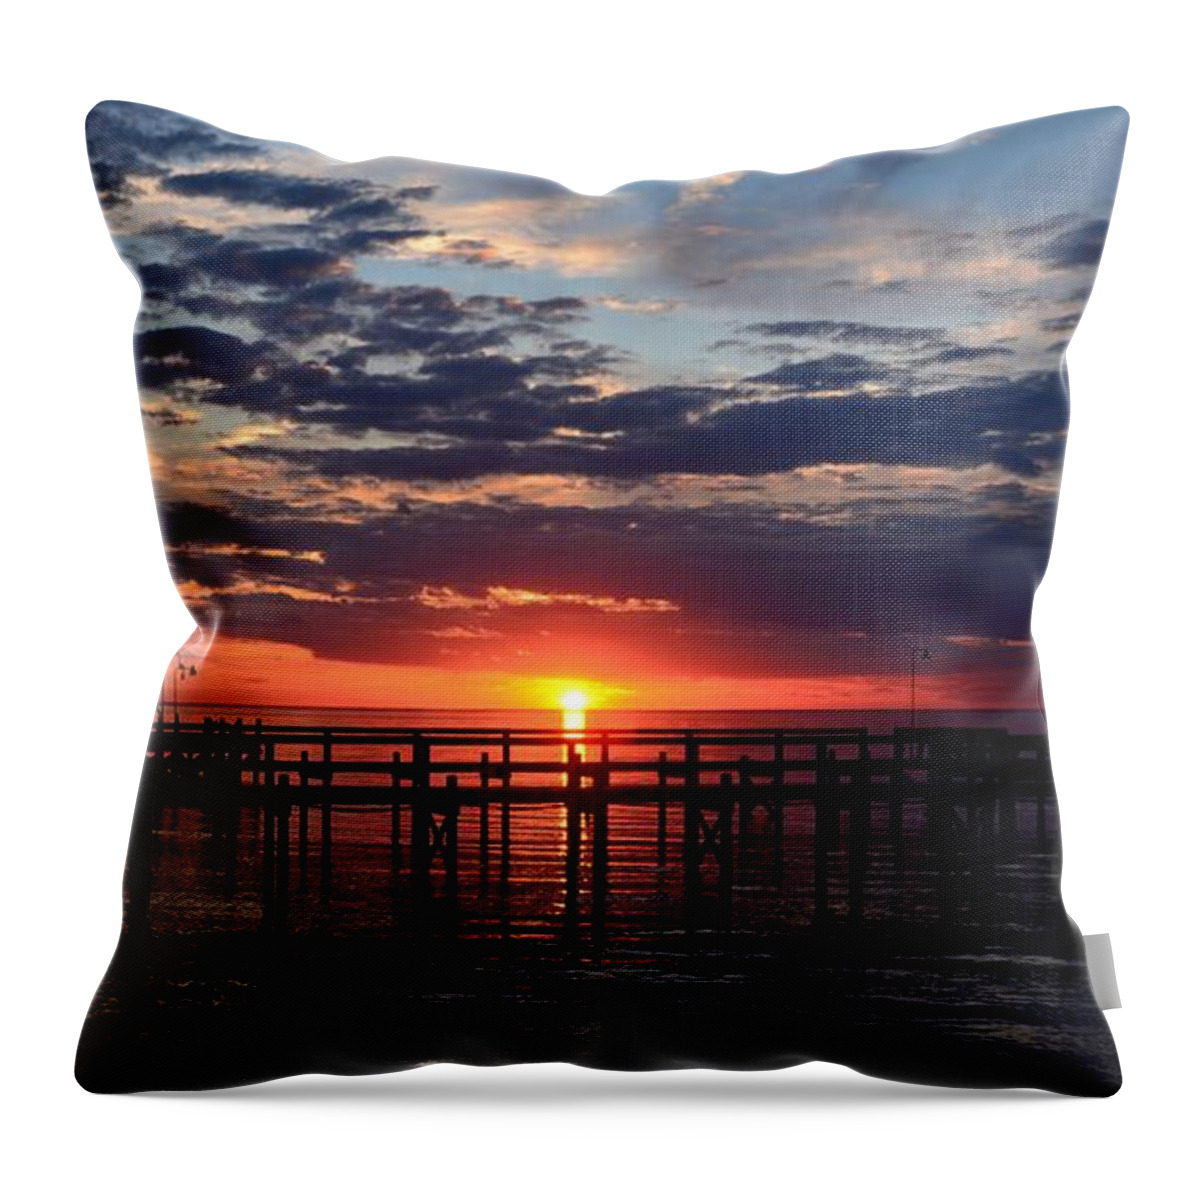 Sunset Throw Pillow featuring the photograph Sunset - South Carolina by Adrian De Leon Art and Photography